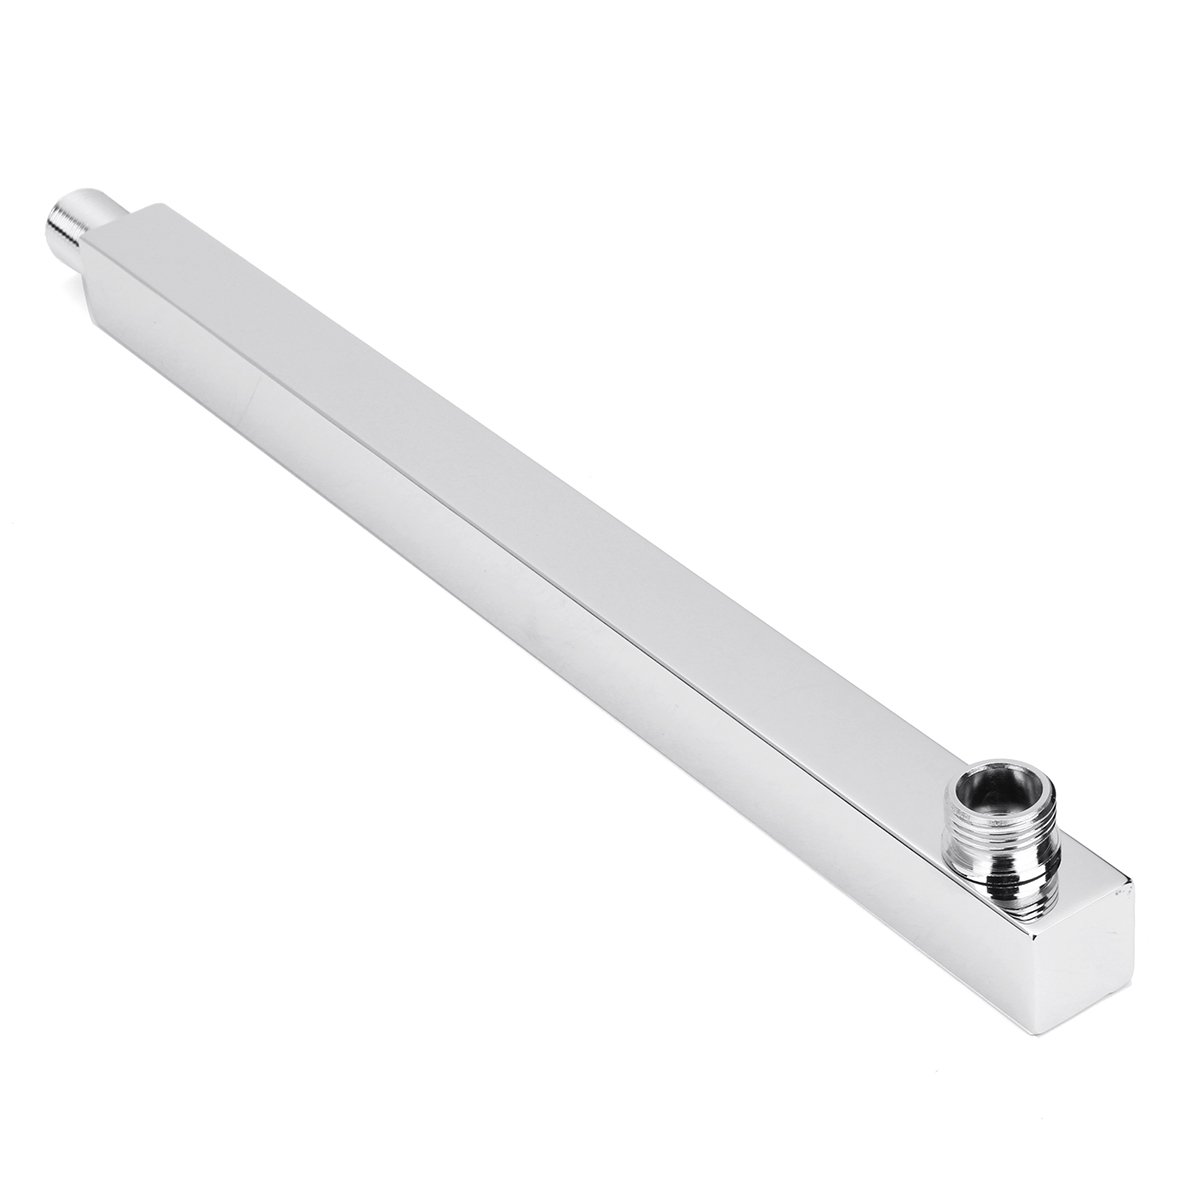 Stainless-Steel-Shower-Arm-Extension-Rod-Adjustable-Extension-Arm-for-Shower-Head-1244128